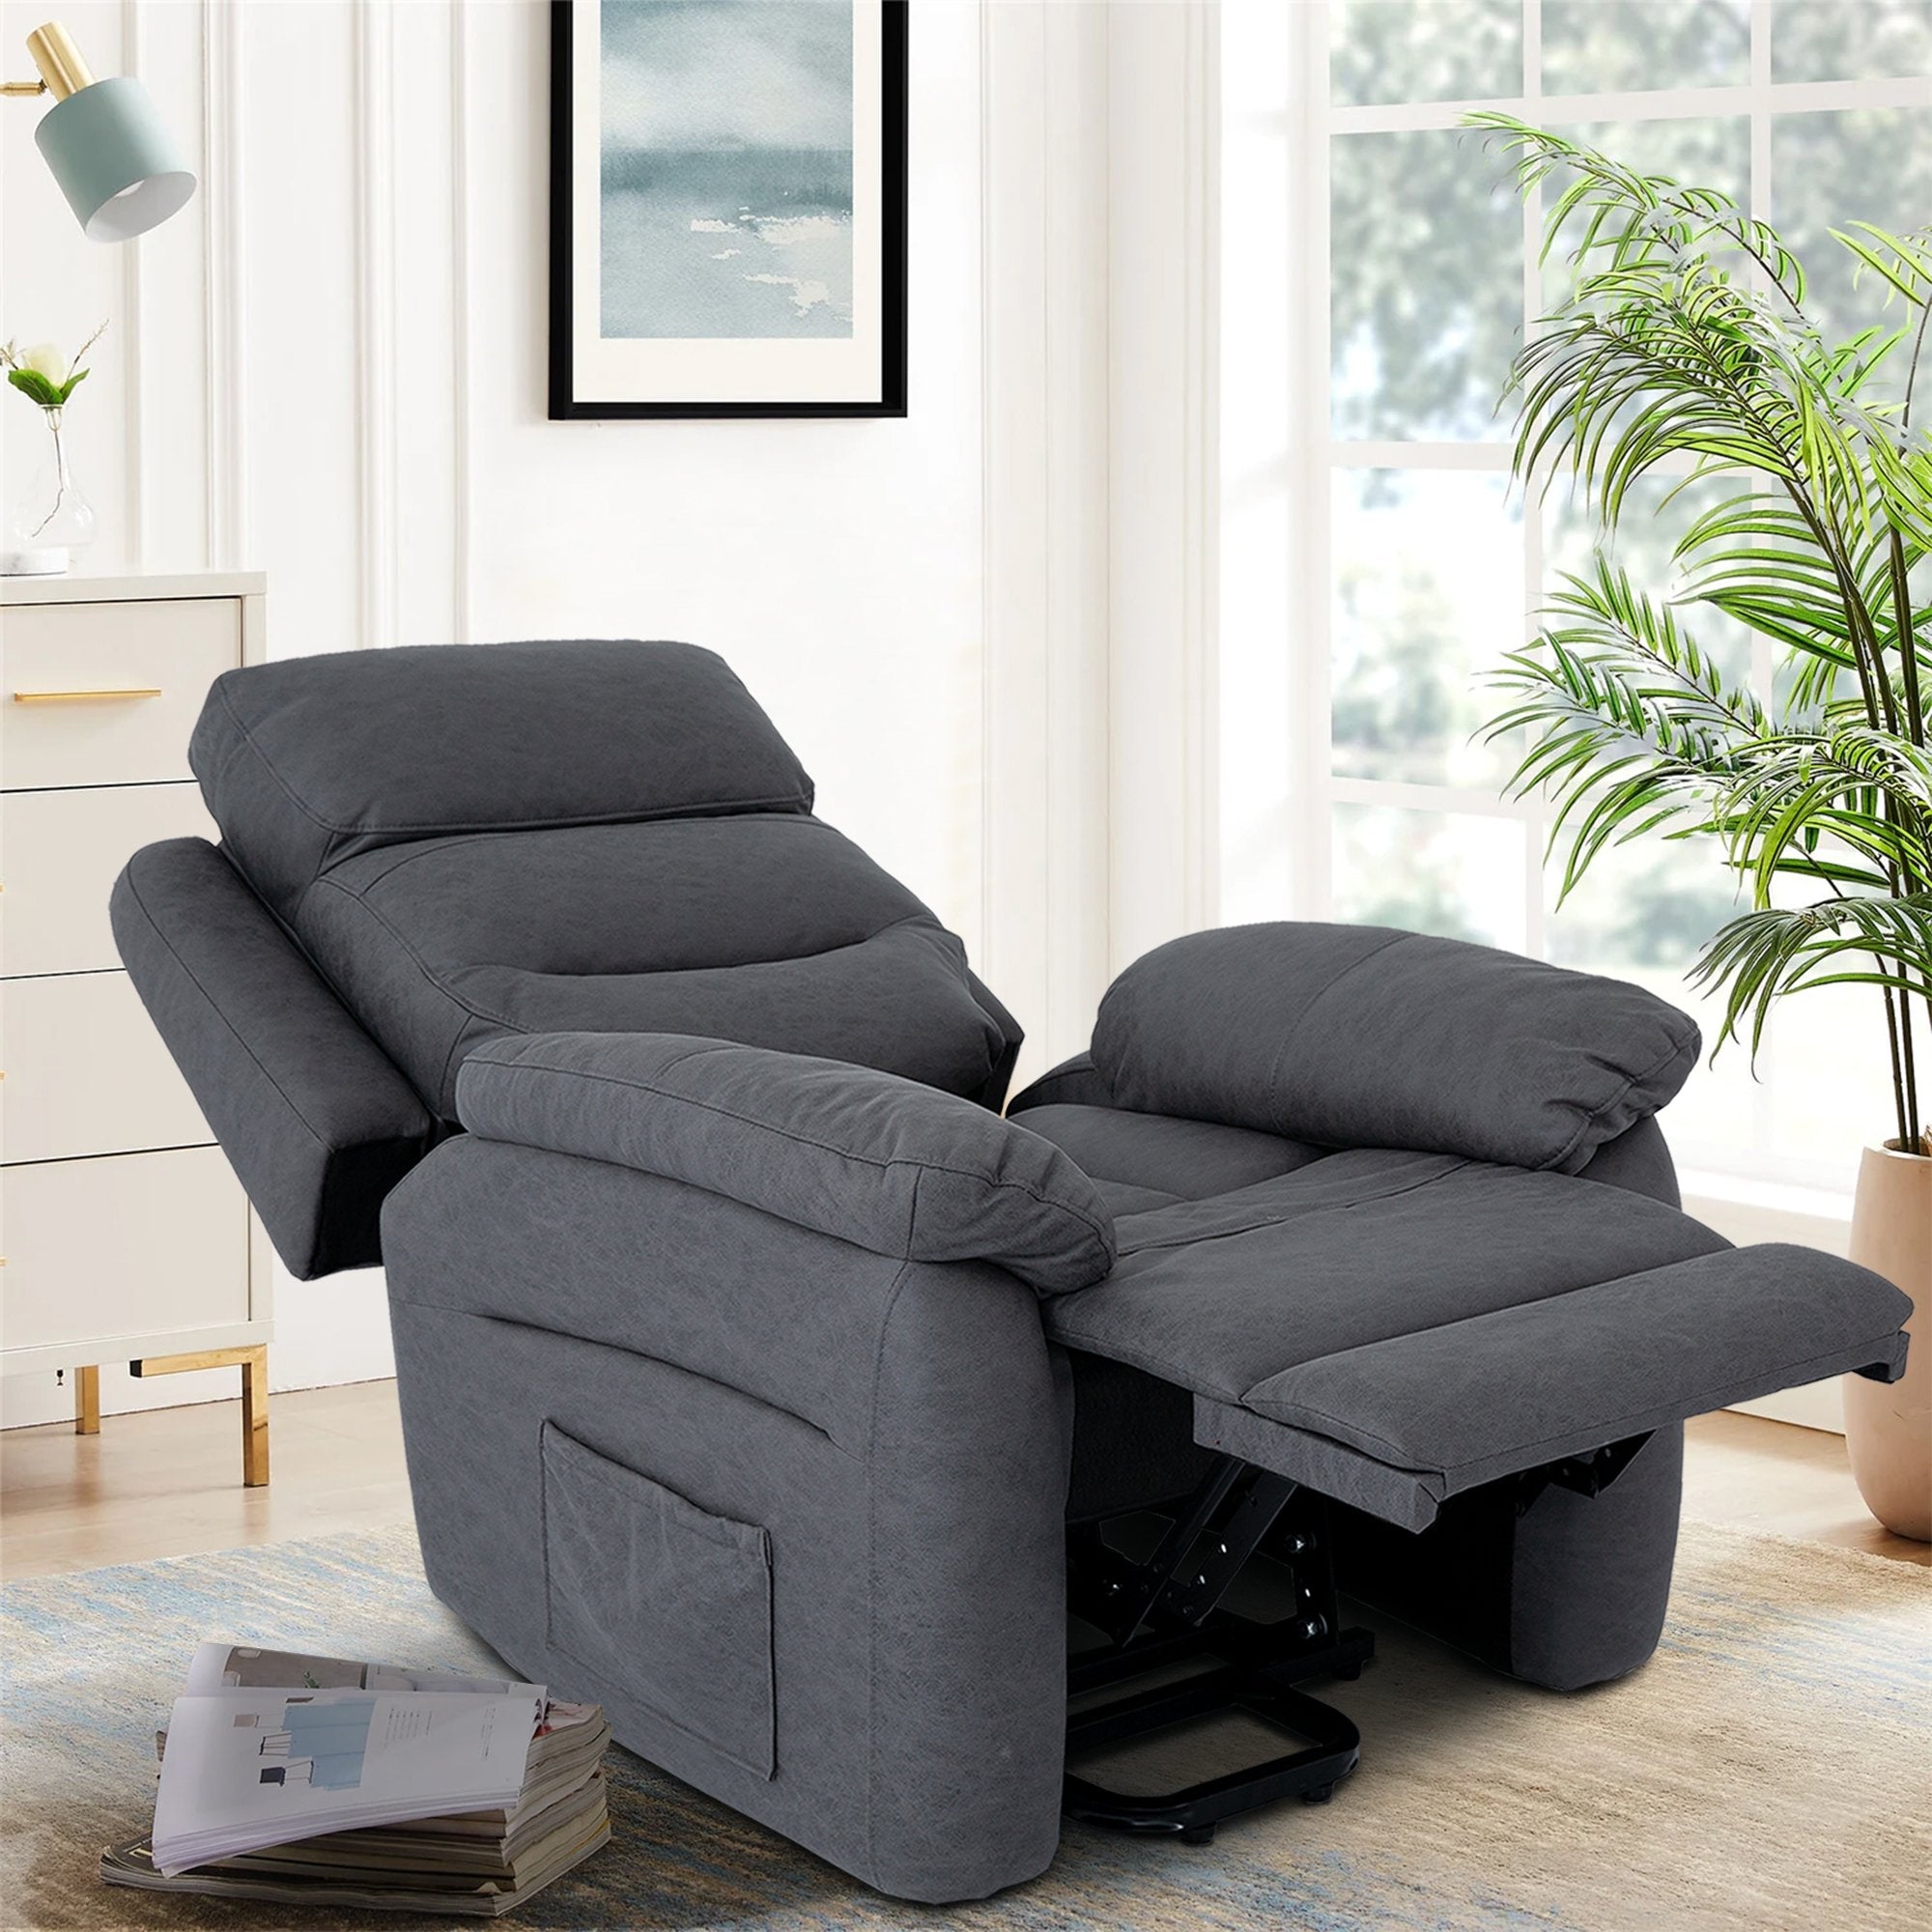 Clihome Power Lift Assist Standard Recliner with Storage